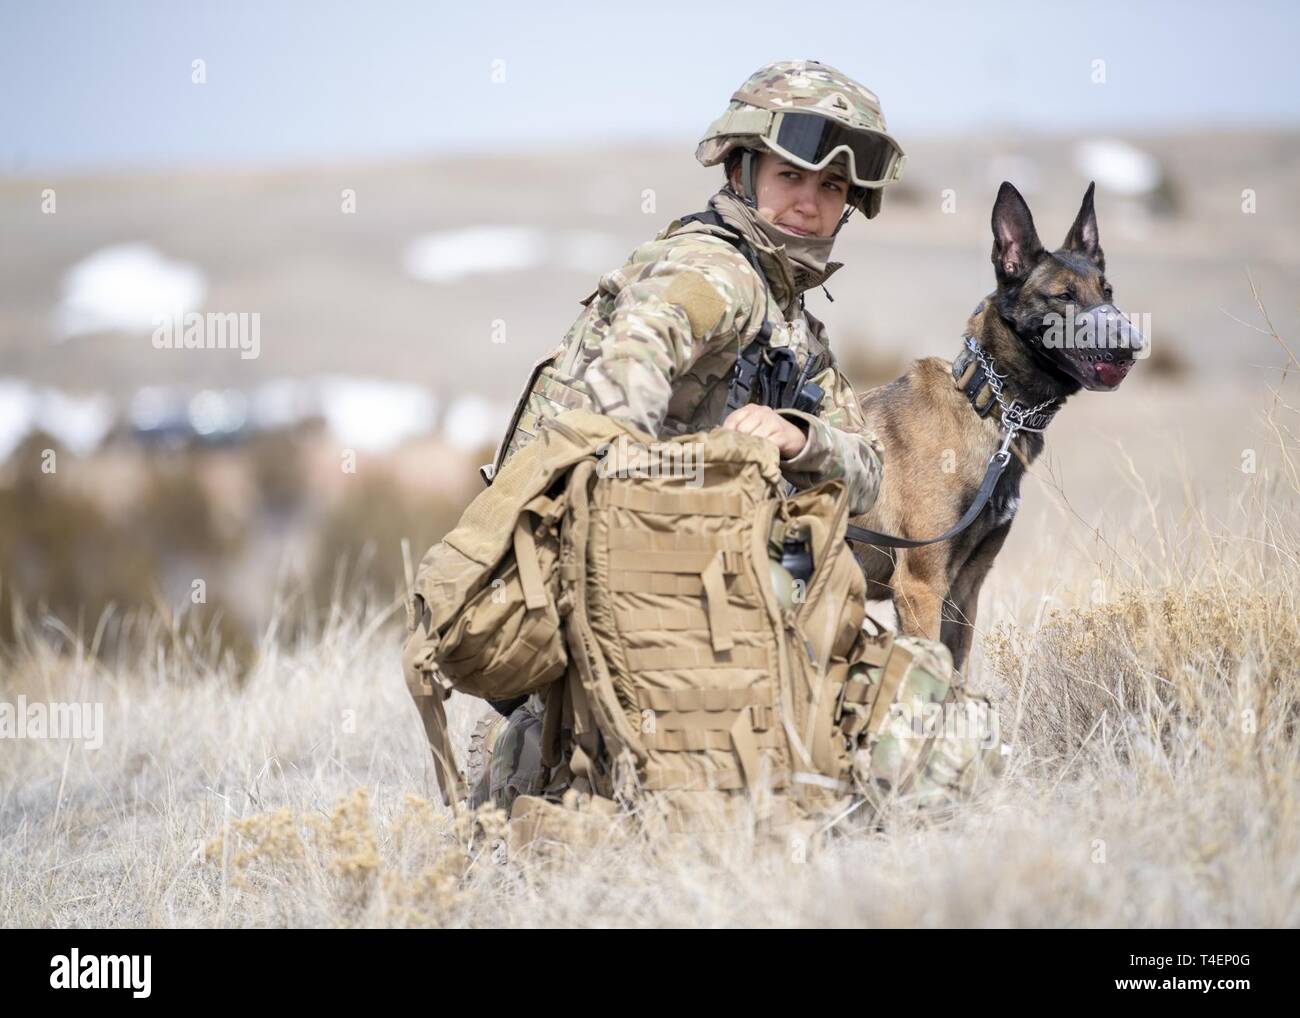 Staff Sgt. Lindsay Zaccardi, 823d Base Defense Squadron (BDS) military working dog (MWD) handler, and JJoan, 823d BDS MWD, dig into their pack for medical supplies during the Mission Readiness Exercise (MRX) at Camp Guernsey, Wyo., March 26, 2019. The pair was patrolling an entry control point when two scenario actors approached the ECP as injured, local civilians. Stock Photo